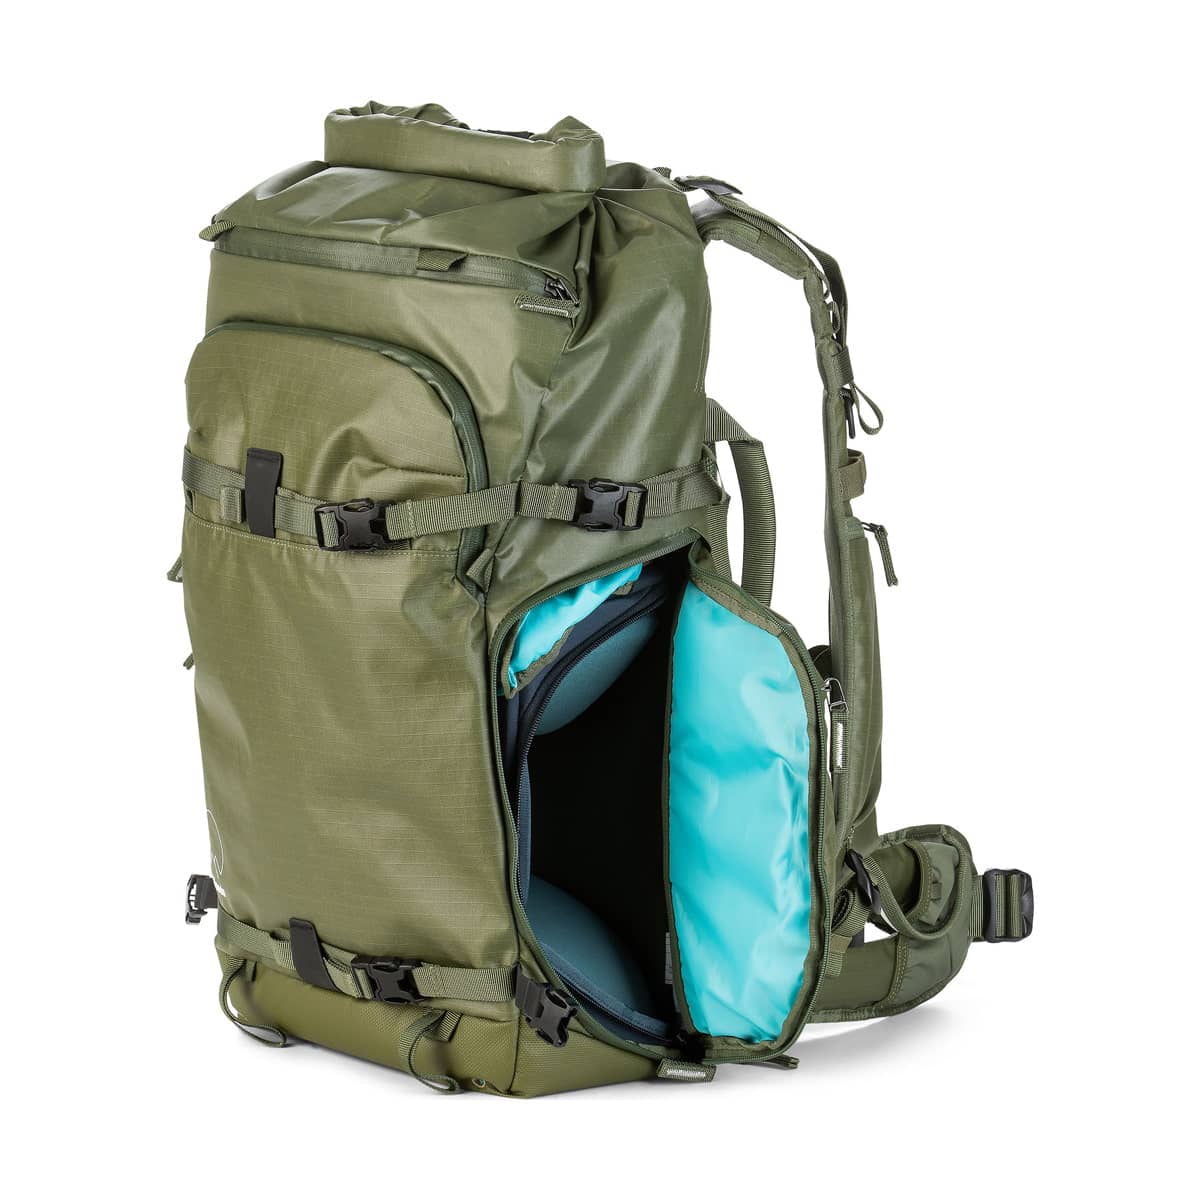 Adventure photography backpack